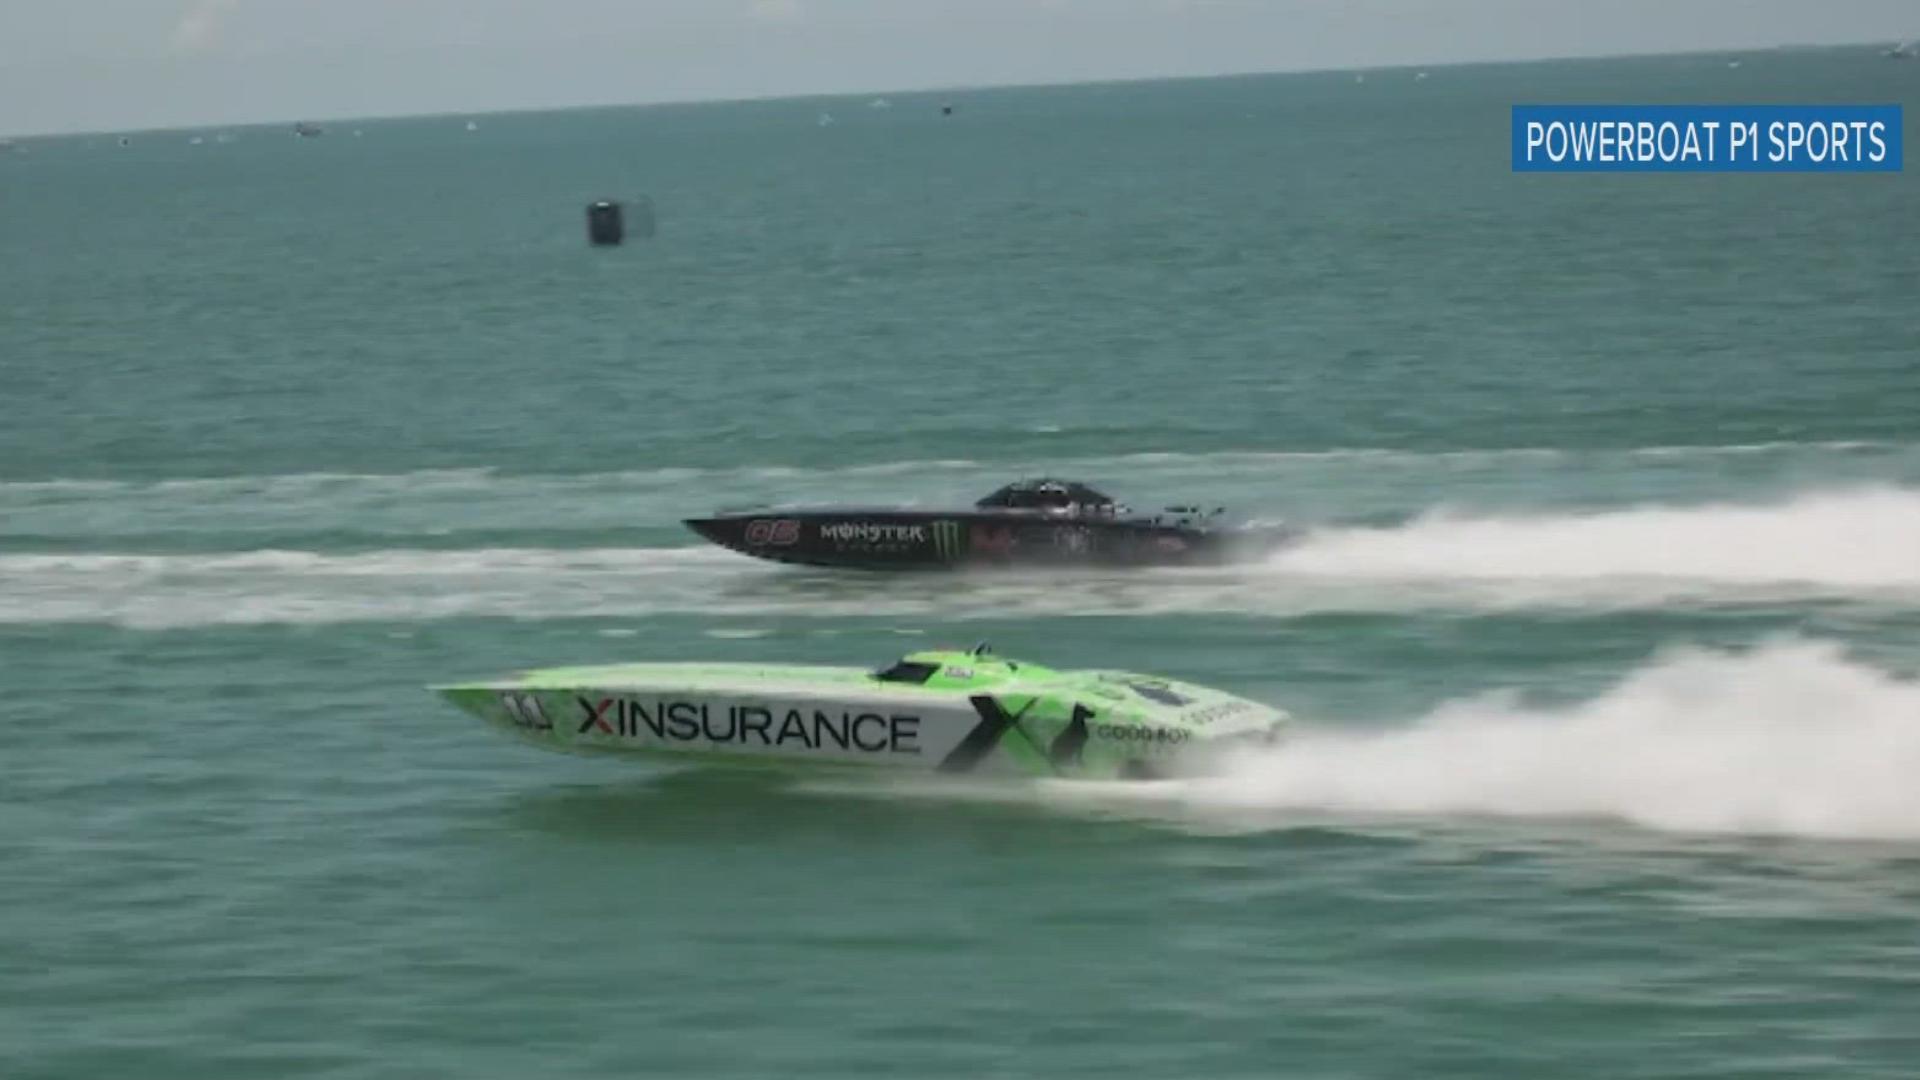 2023's Powerboat Grand Prix generated an estimated $5 million in economic impact for Sarasota.